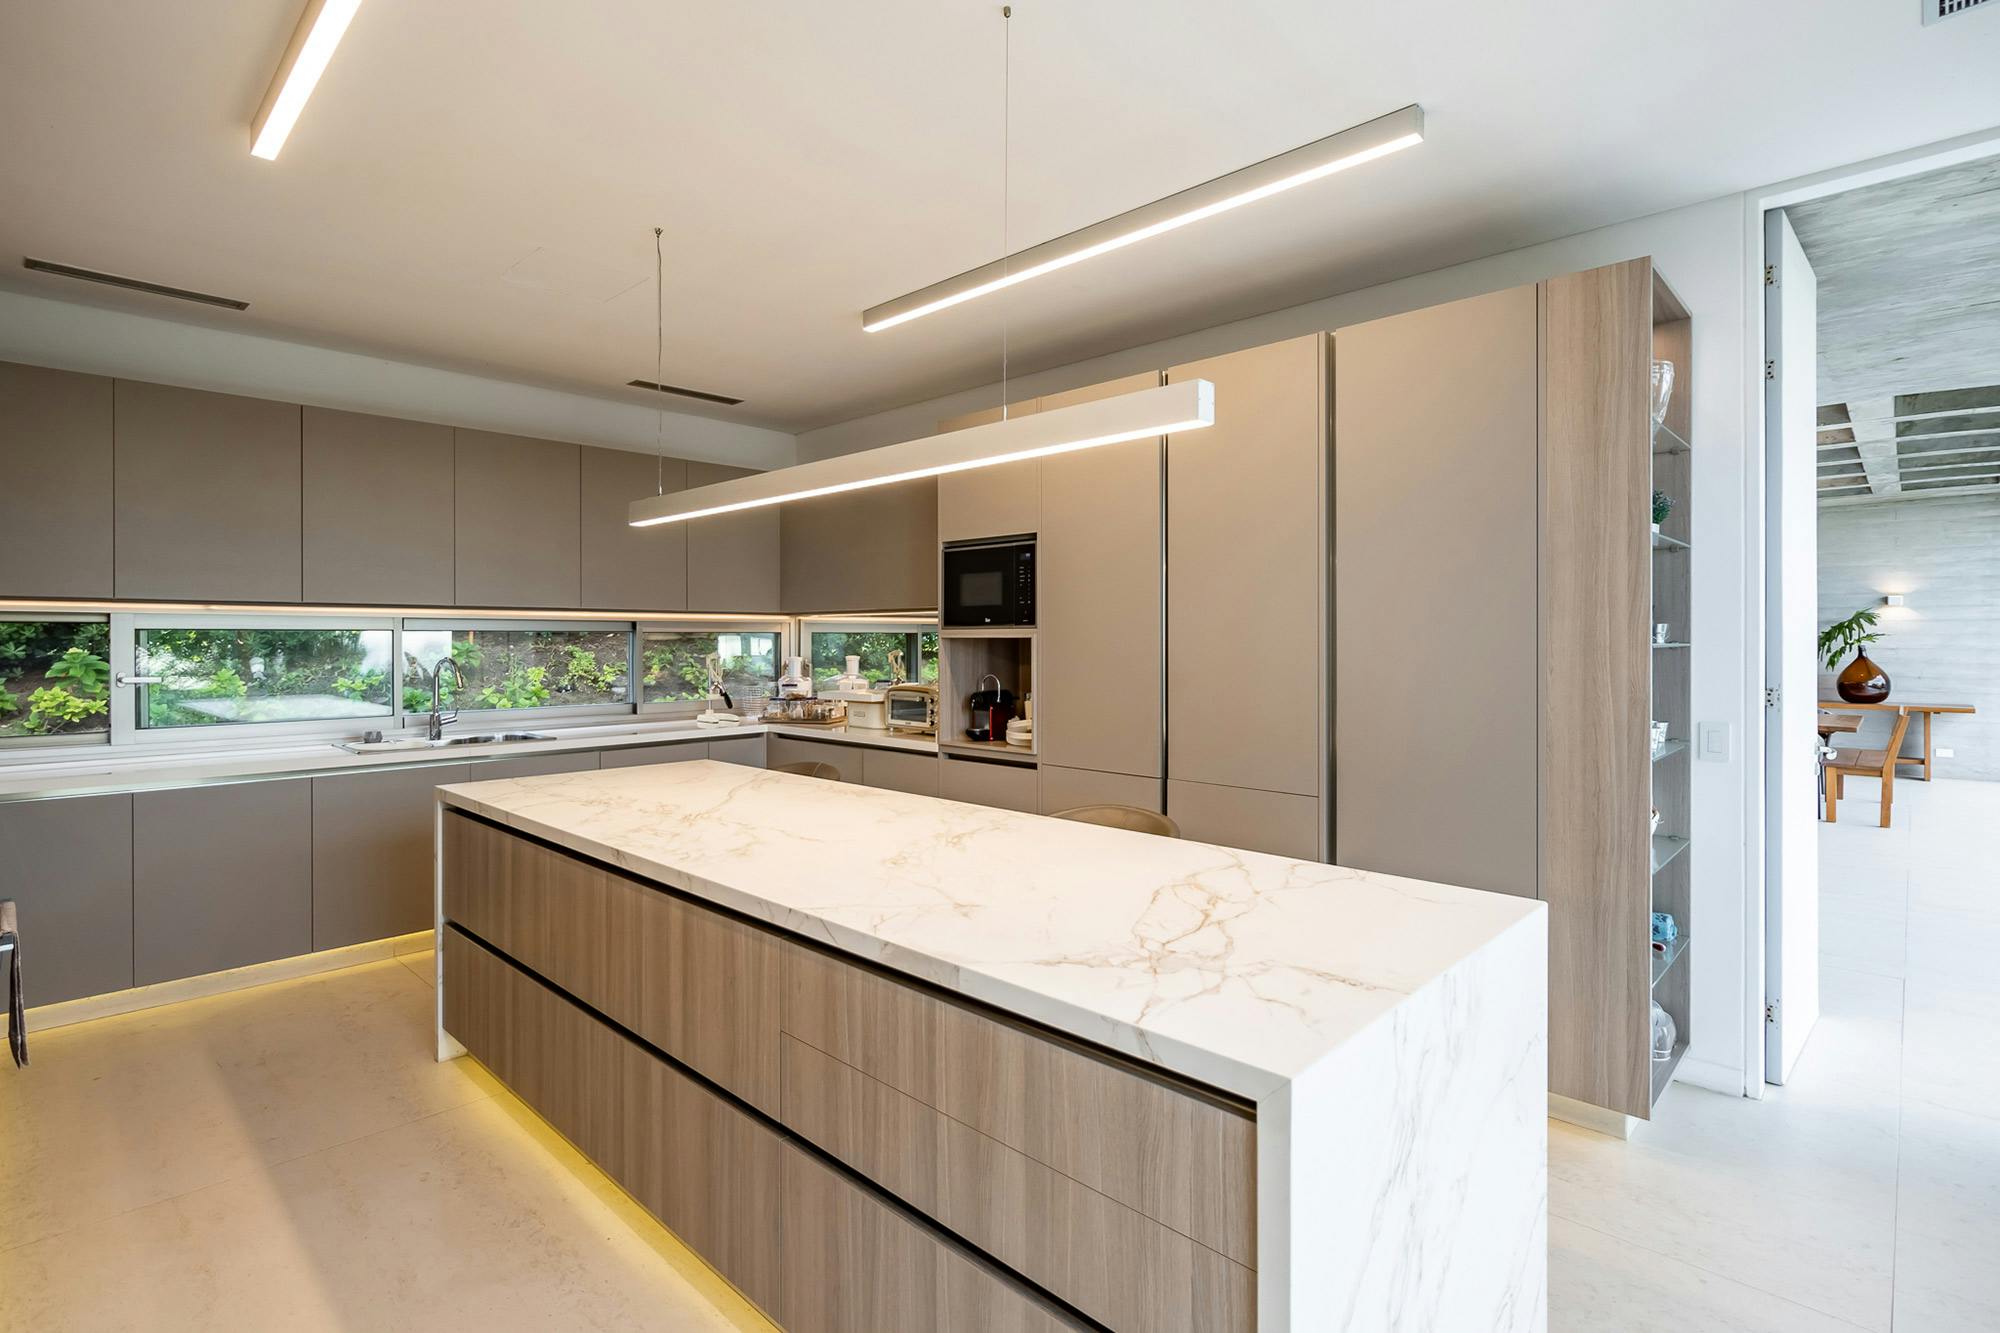 Numéro d'image 37 de la section actuelle de DKTN Sirius adds a welcoming touch to the kitchens of a residential development in Dubai de Cosentino France